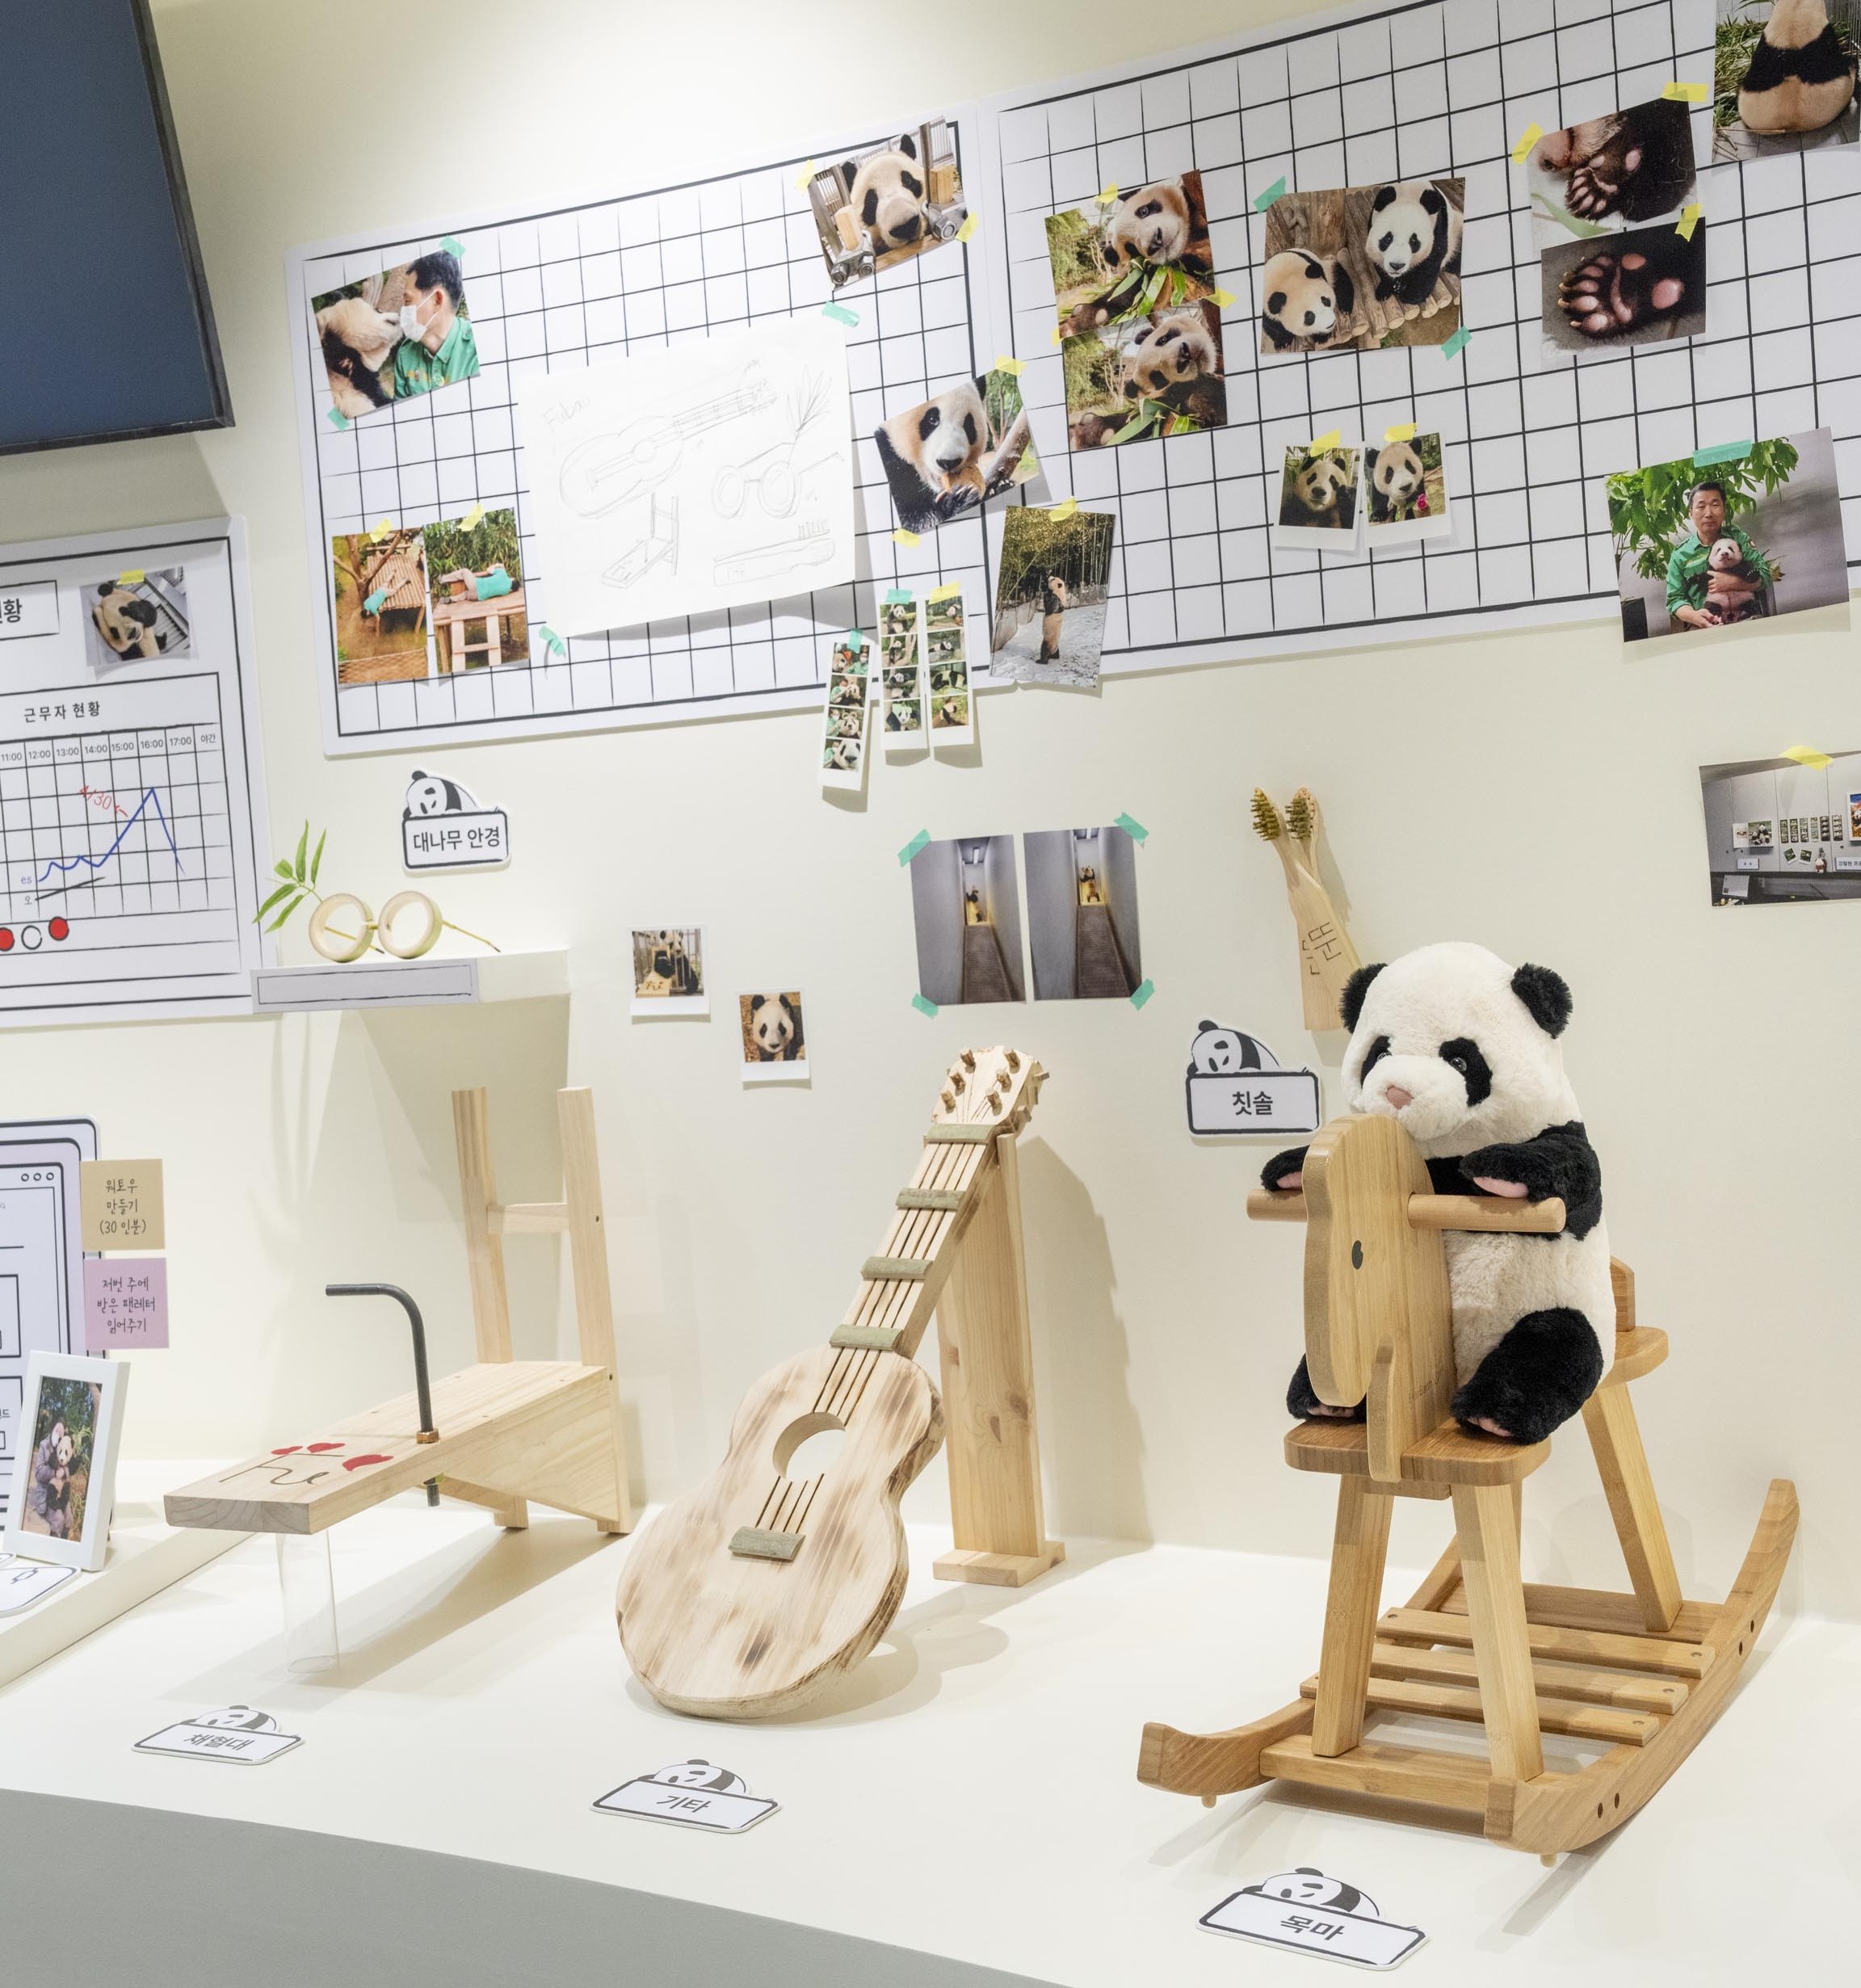 See some of the toys that Fu Bao played with when she was a baby.